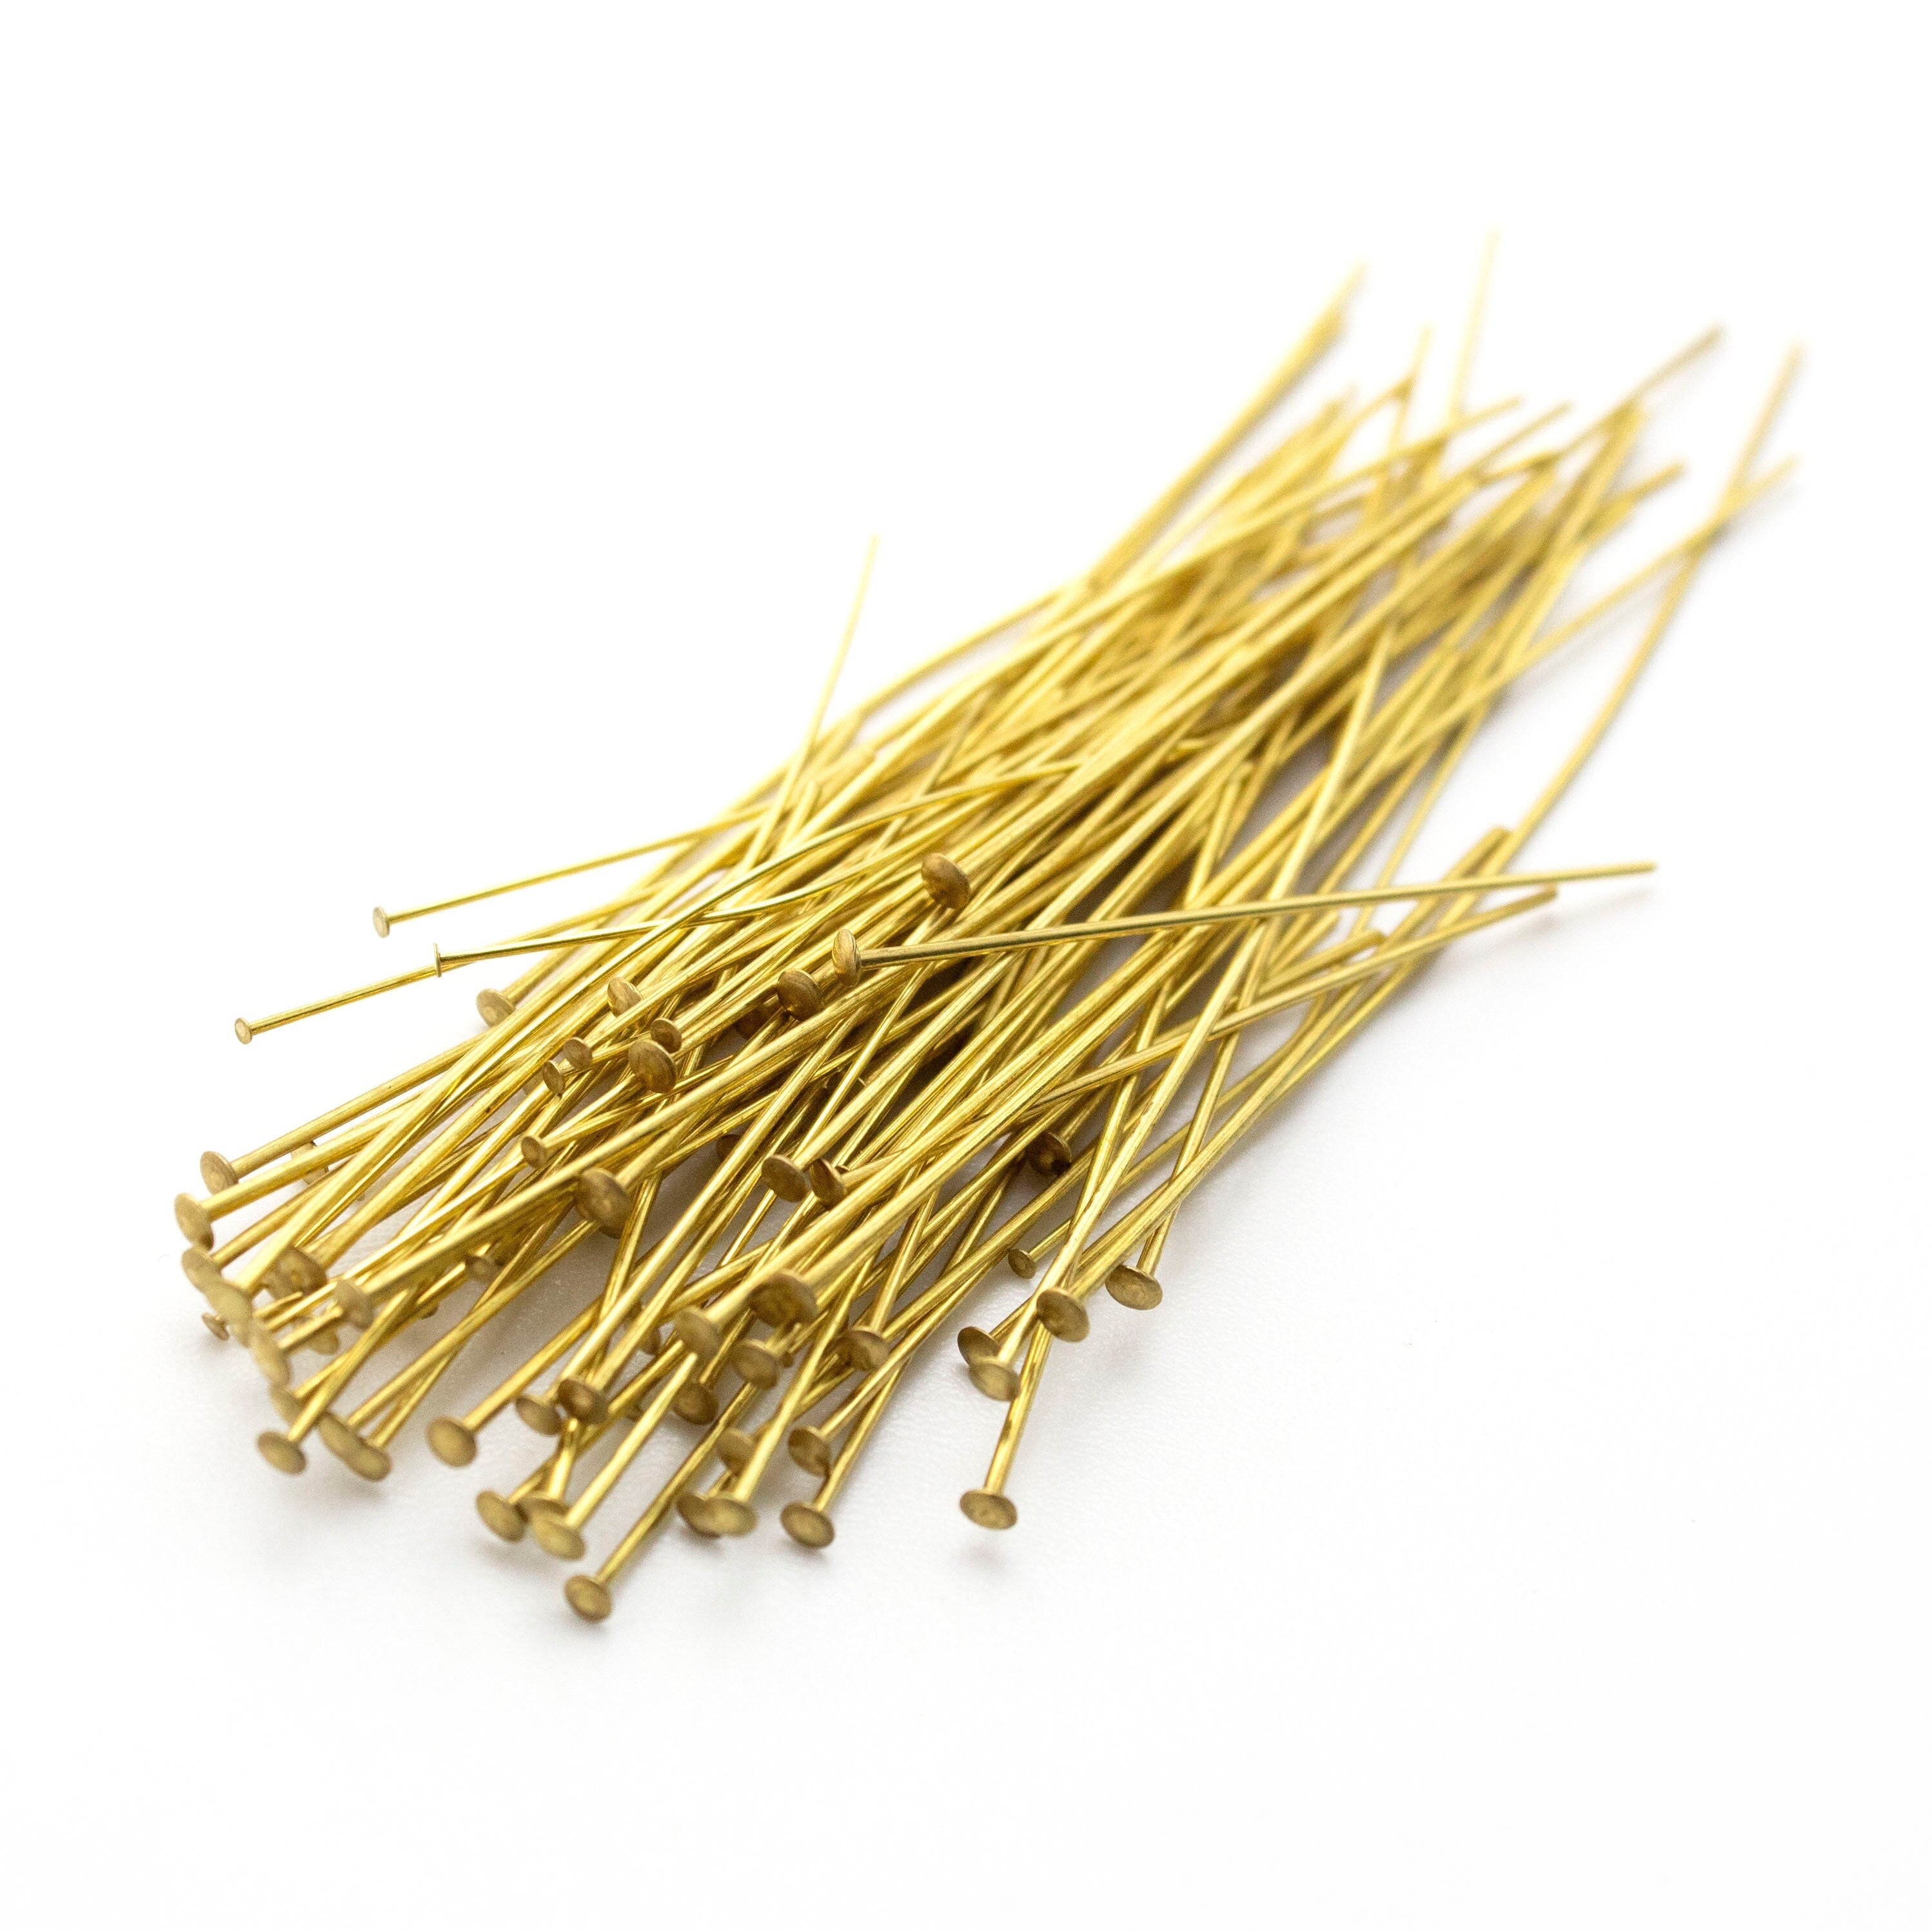 100 Yellow Brass Flat Head Pins - 20, 21, or 24 gauge - These are